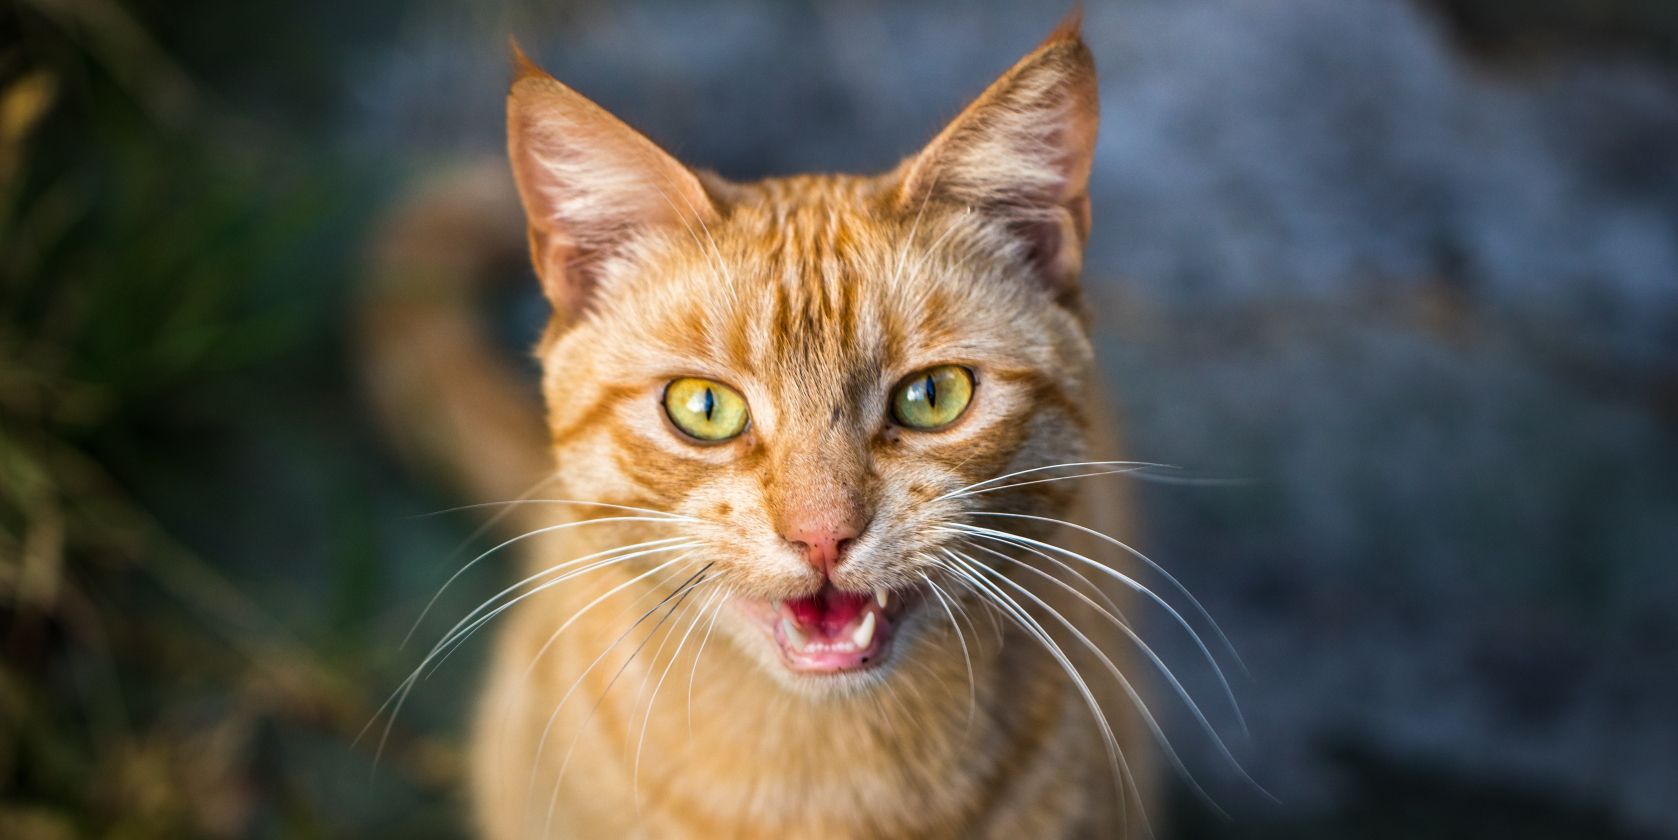 image of a meowing cat from Unsplash